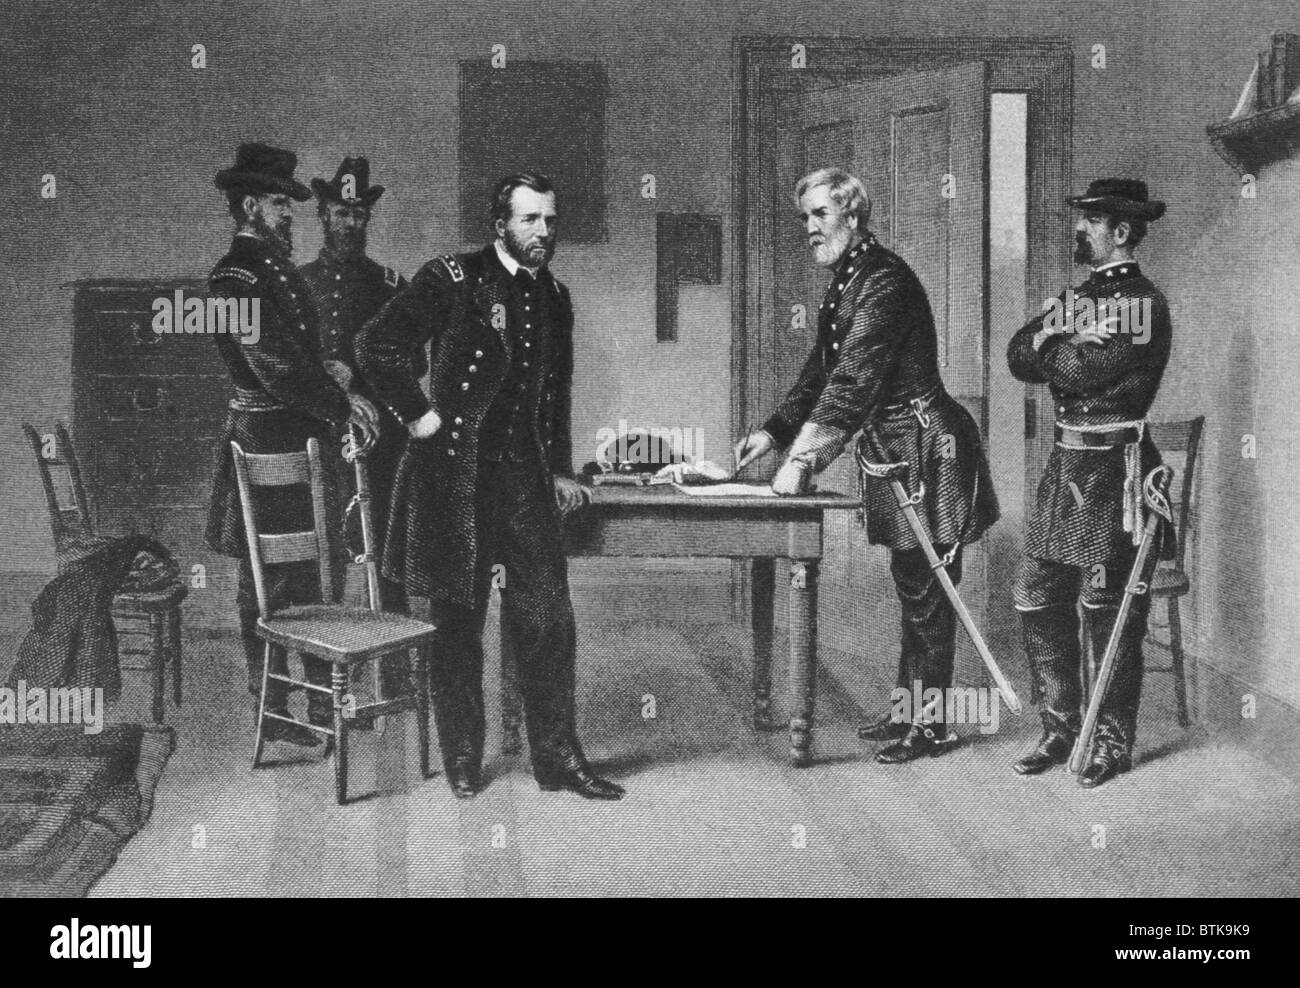 Confederate General Robert E. Lee surrenders to Union General Ulysses S. Grant at Appomattox Court House, Virginia, April 9, 1865, from The New York Times Stock Photo